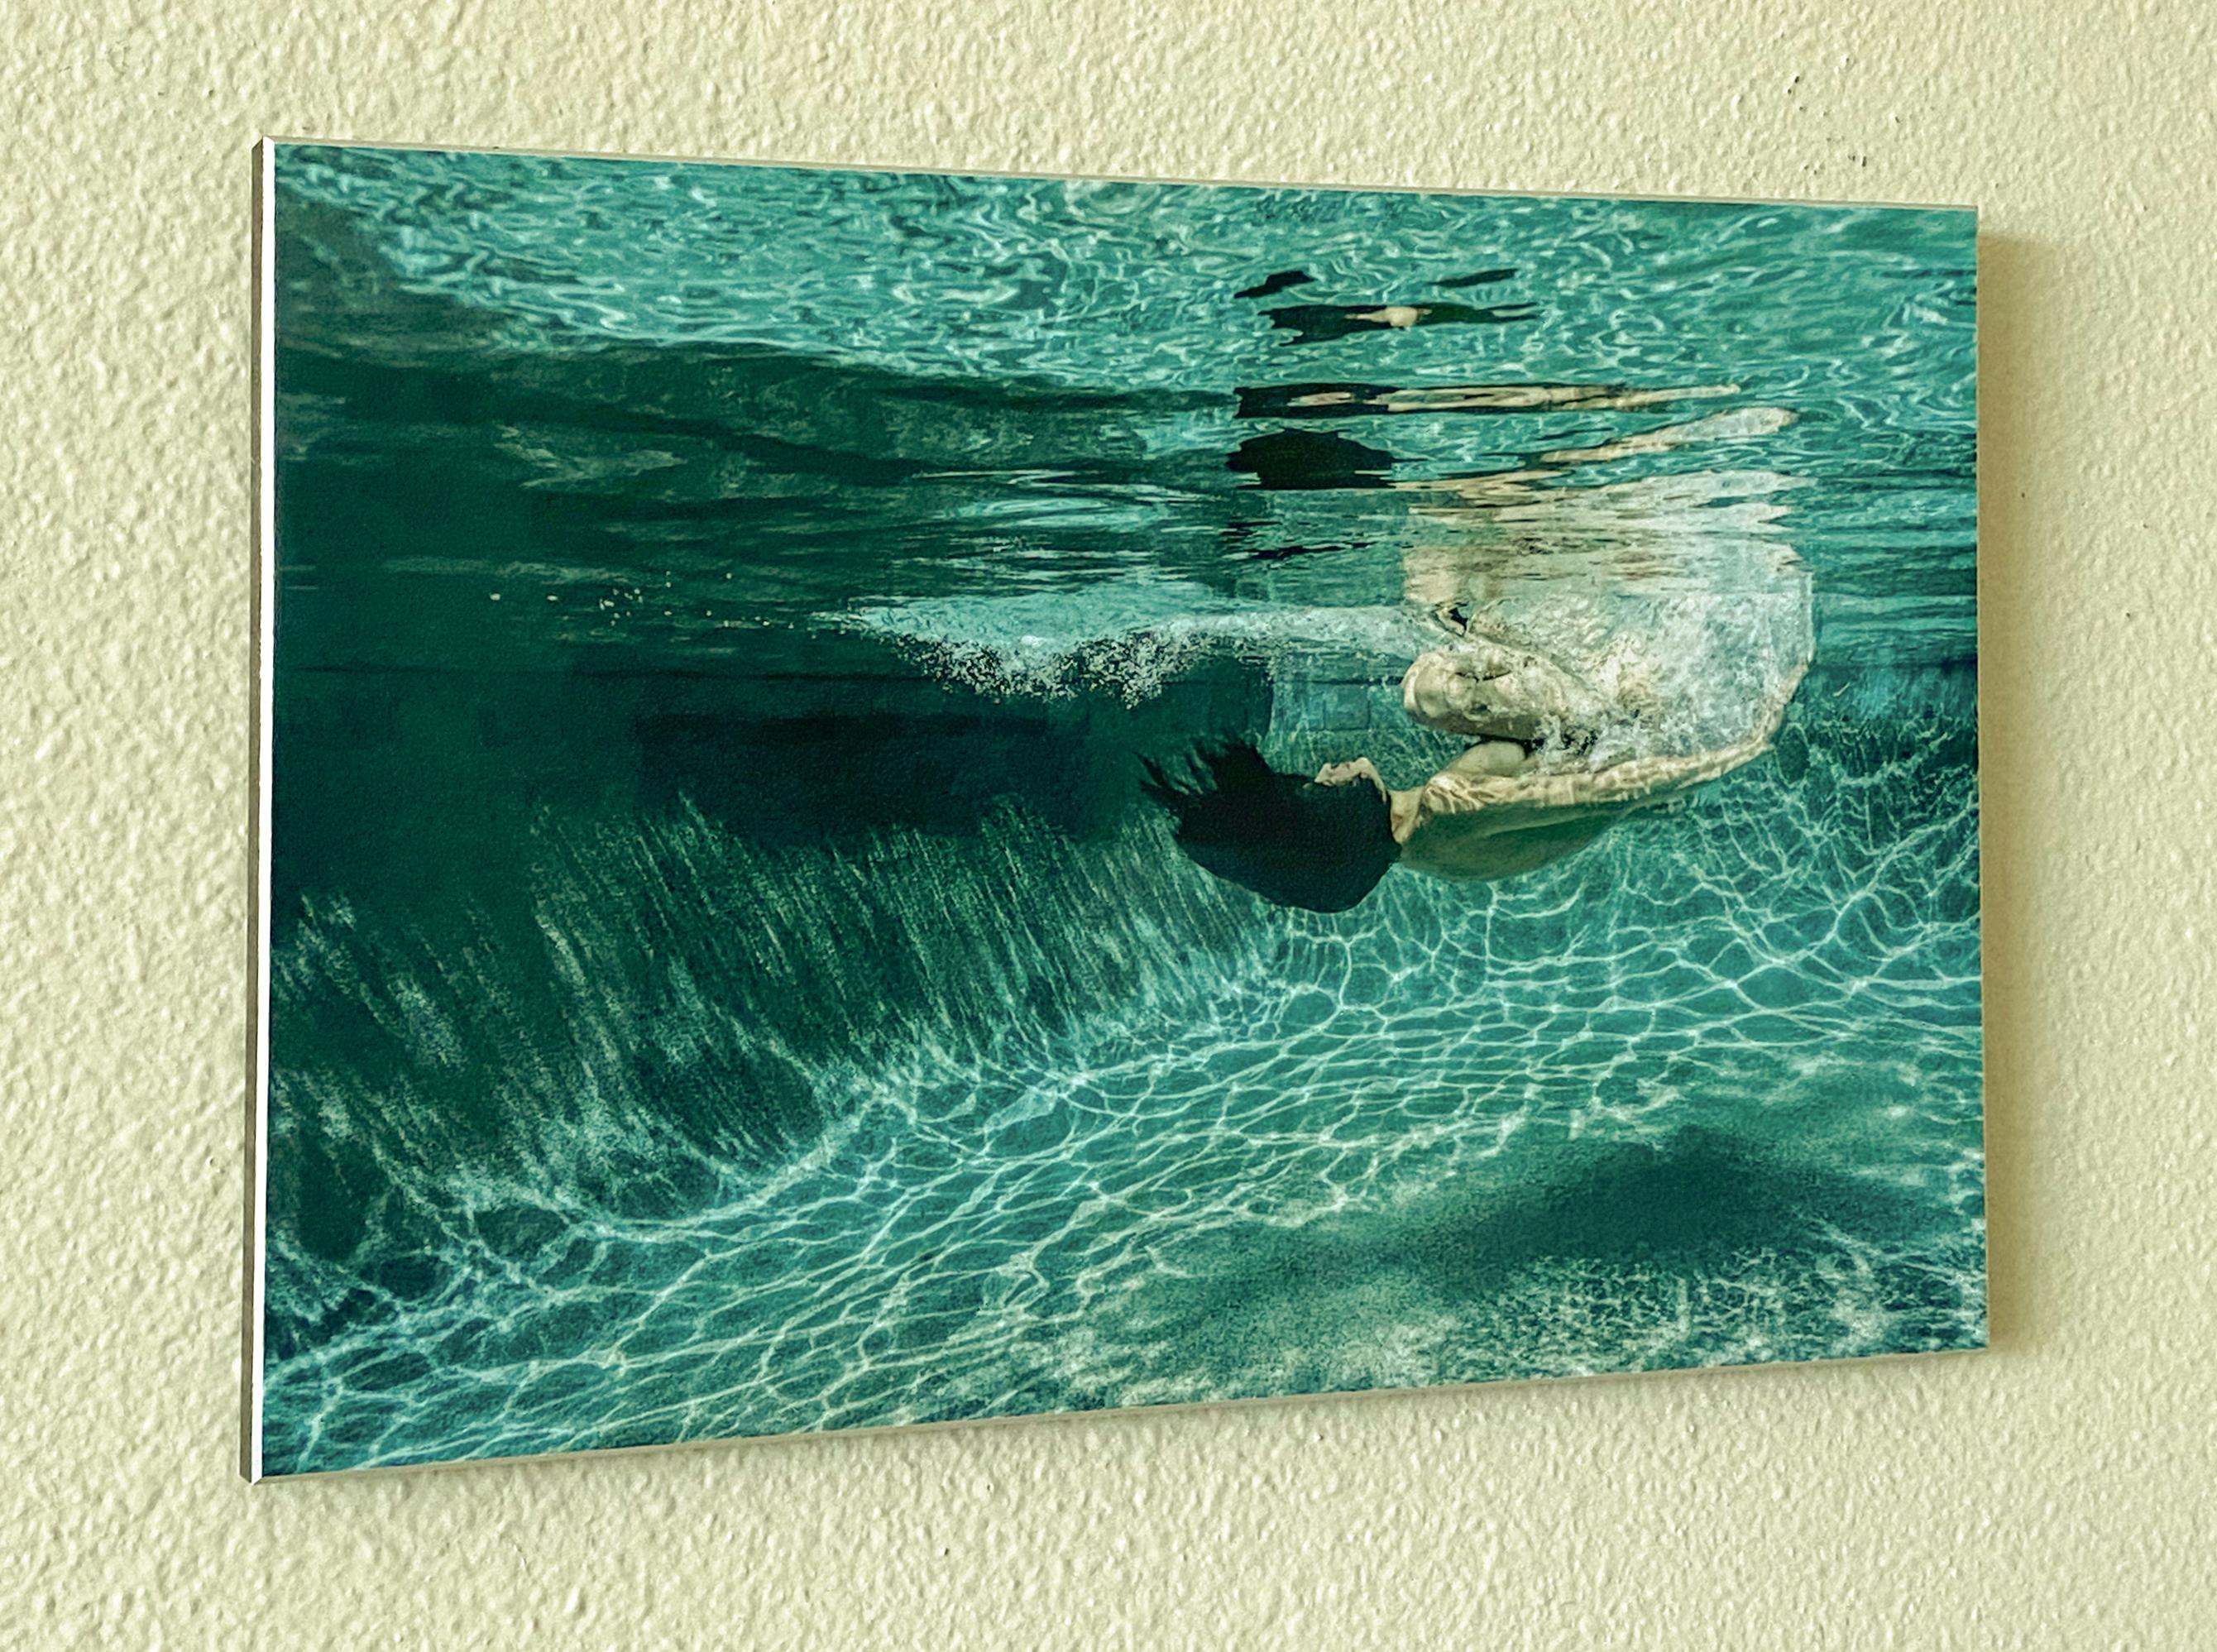 Green Roll I  - underwater nude photograph - print on aluminum - Contemporary Photograph by Alex Sher